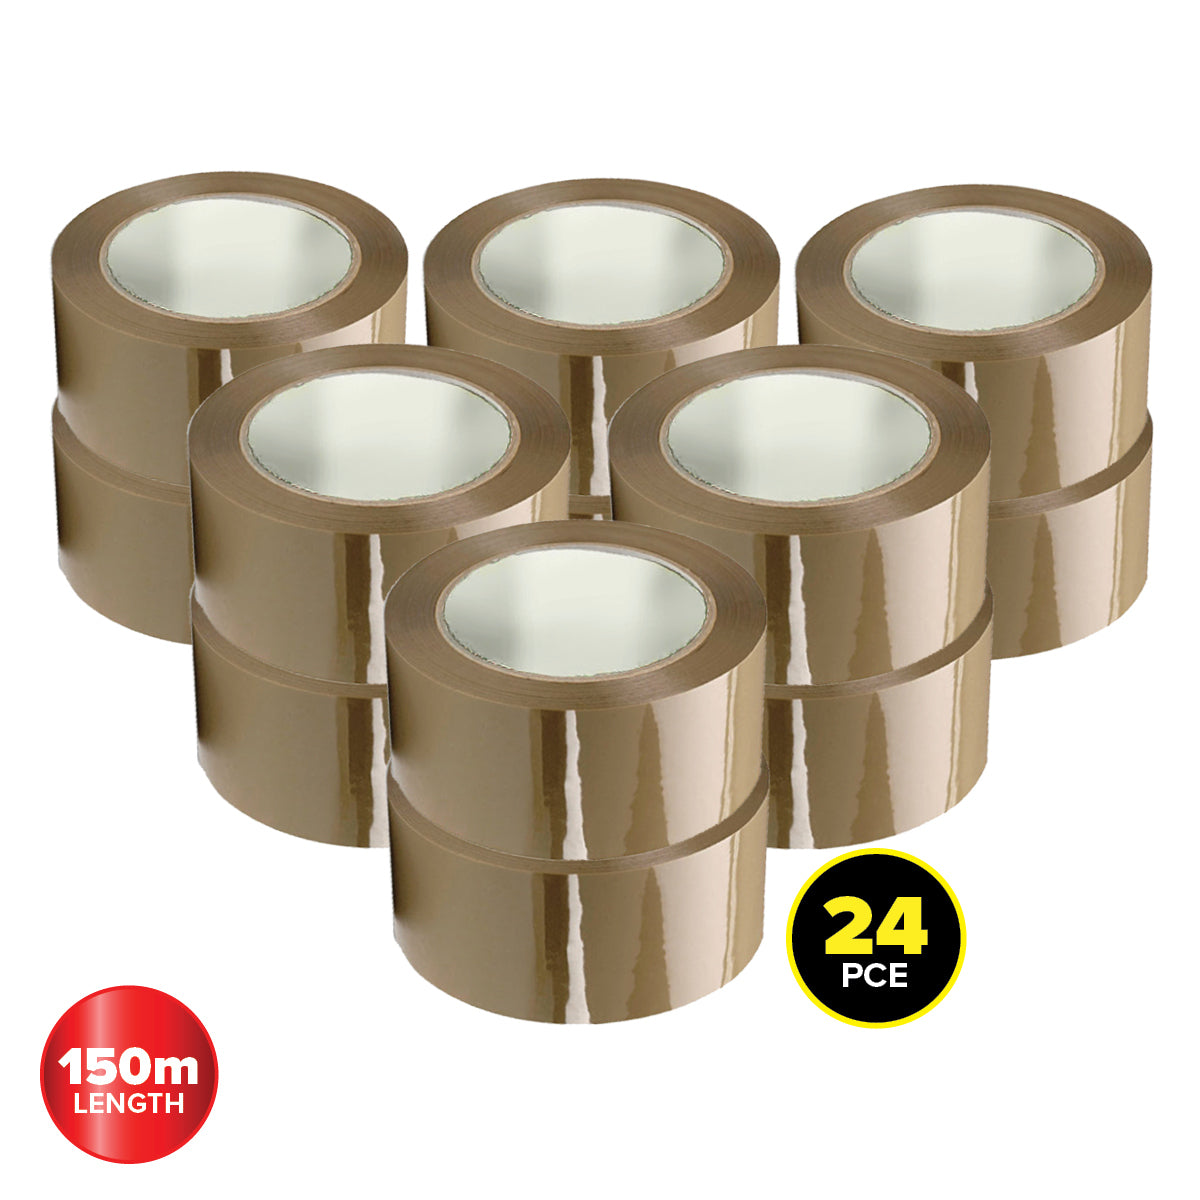 Handy Hardware 24Pce Packaging Tape Brown Multipurpose Extra Wide 150M X 70Mm